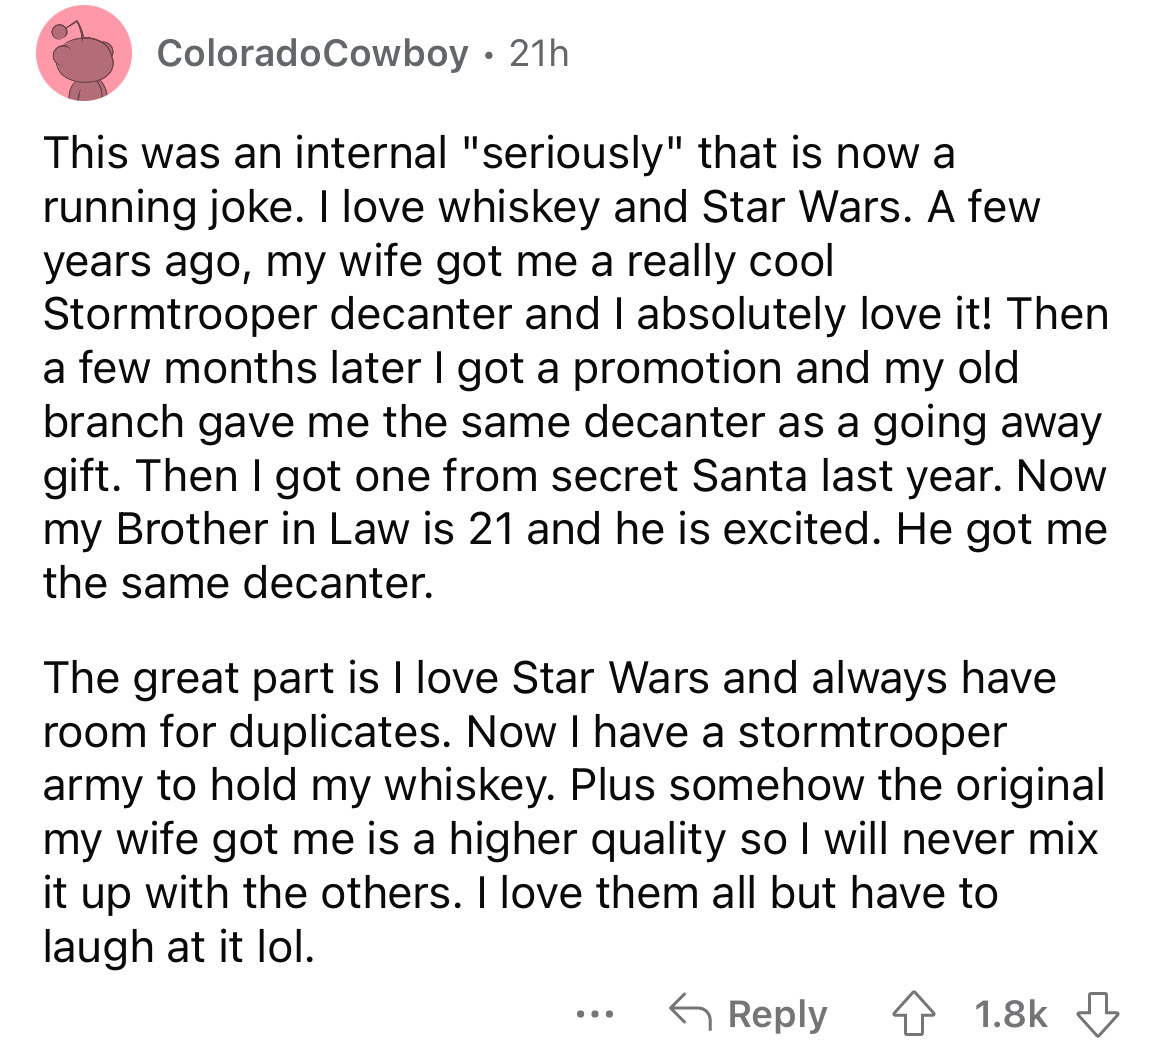 factors of cultural diffusion - ColoradoCowboy 21h This was an internal "seriously" that is now a running joke. I love whiskey and Star Wars. A few years ago, my wife got me a really cool Stormtrooper decanter and I absolutely love it! Then a few months l